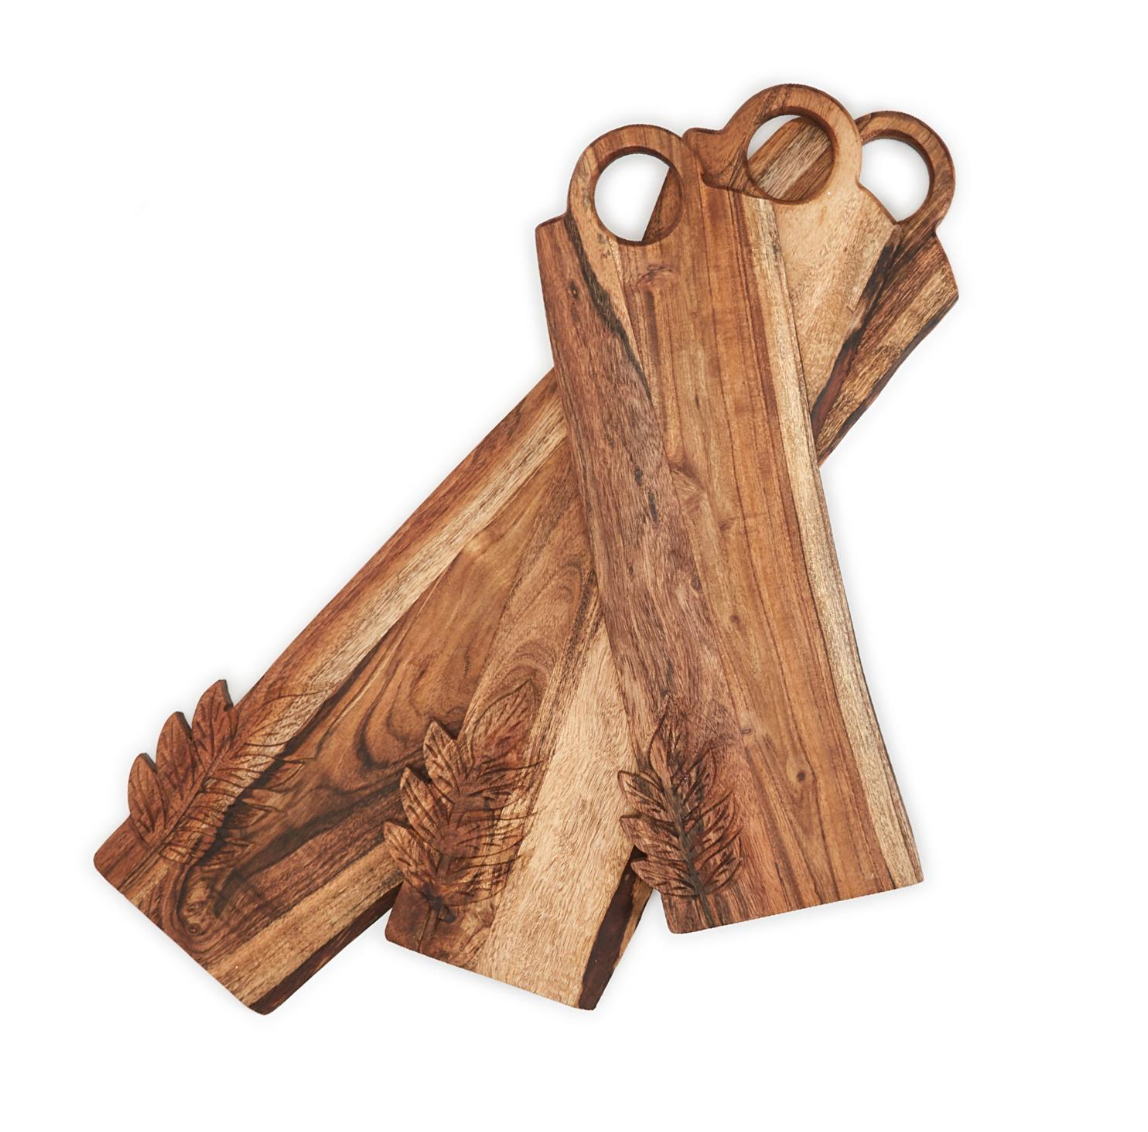 CHARCUTERIE SERVING BOARDS WITH LEAF DESIGN-Medium